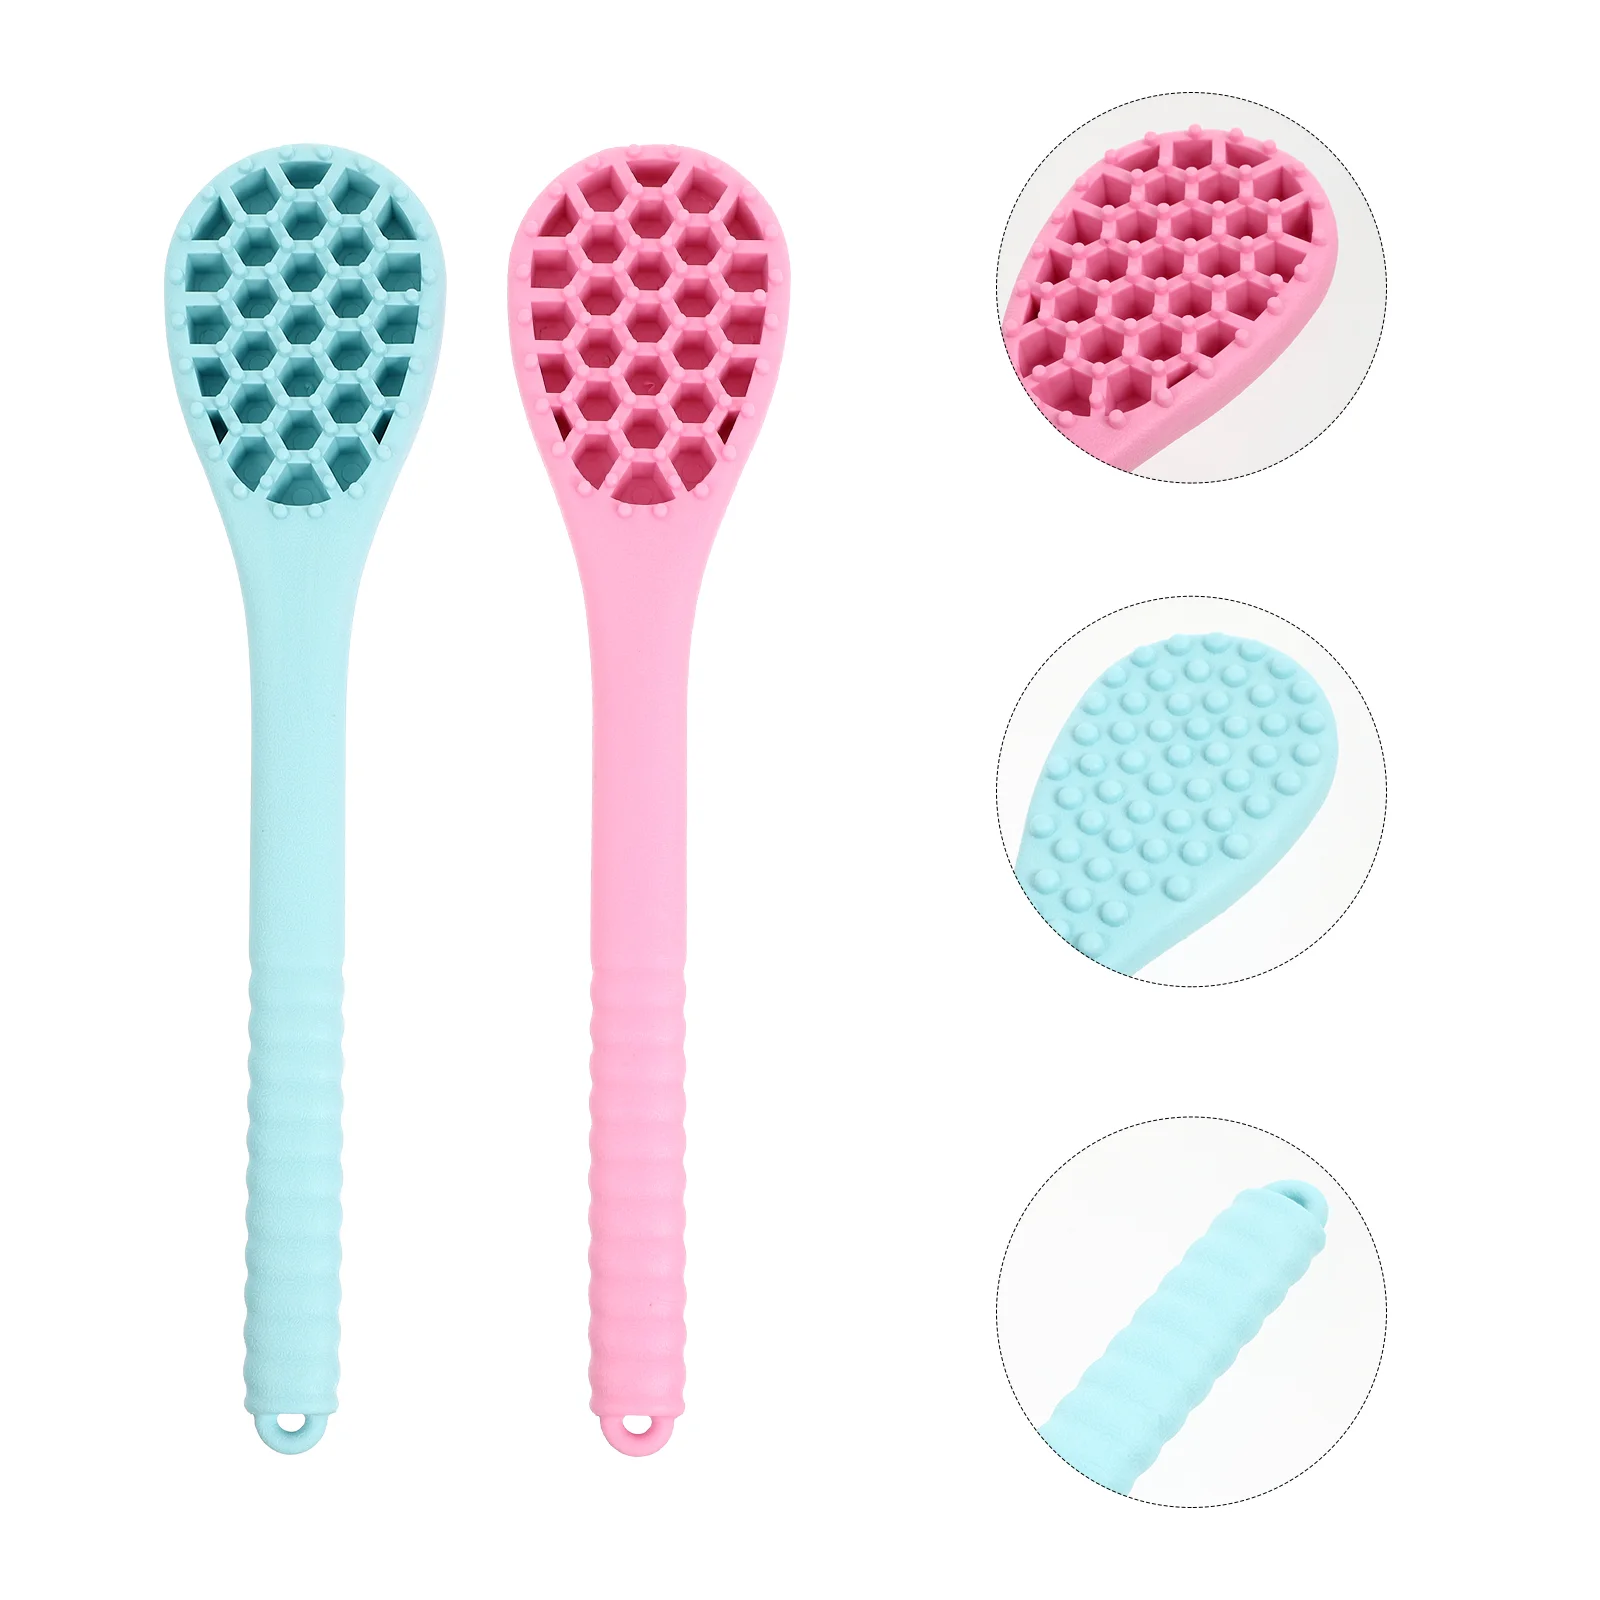 

Body Handheld Hammer Scratcher Tool Neck Hand Spa Knocking Manual Pat Stick Tools Portable Flap Silicone Bat Acupoint Paddle